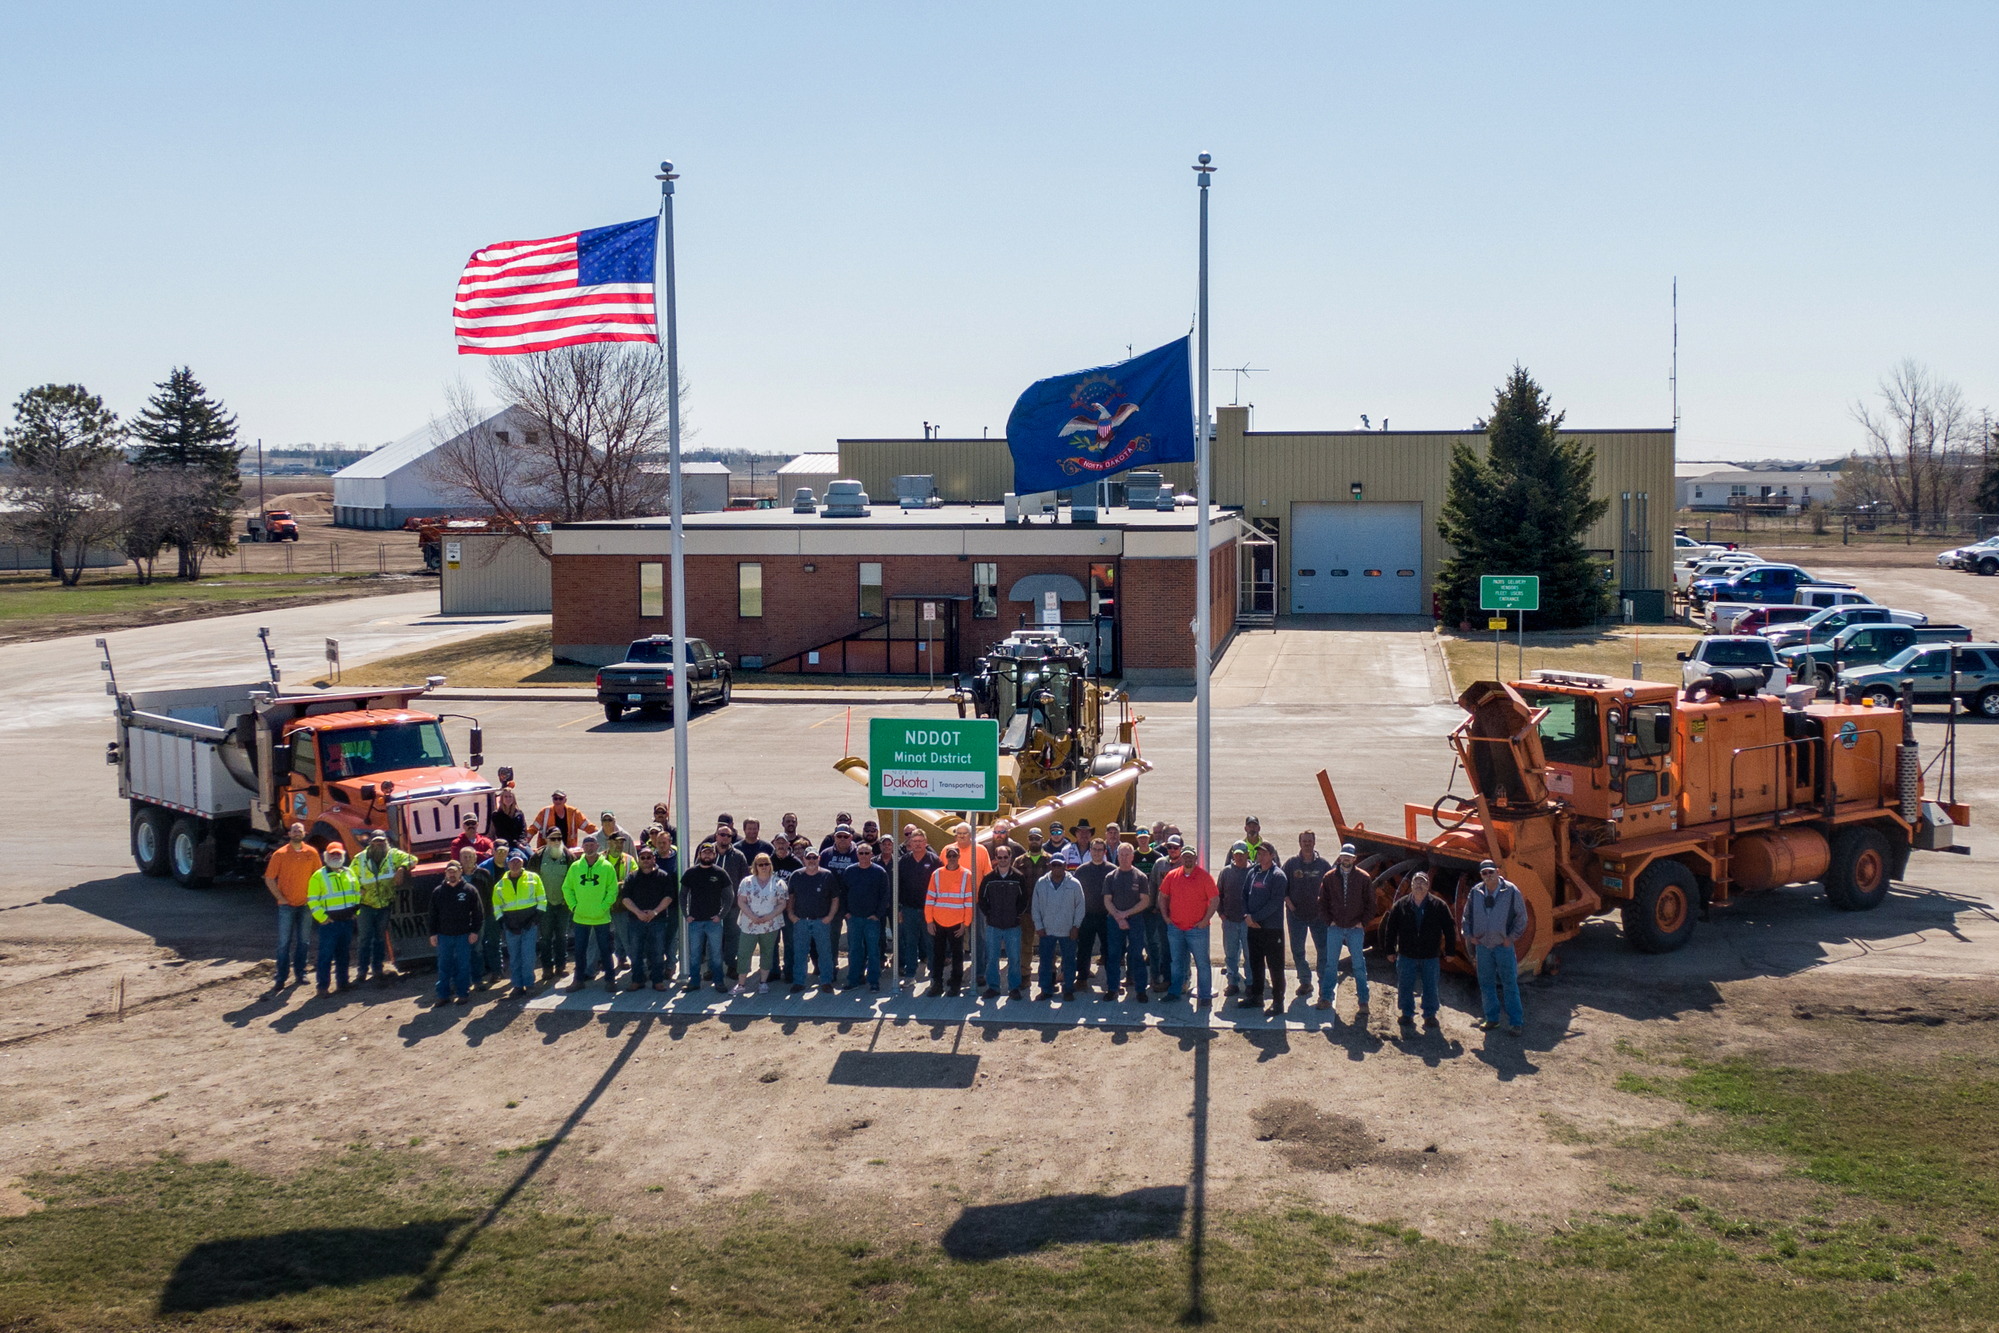 Group photo of Minot District Office employees in front of their buildiing.